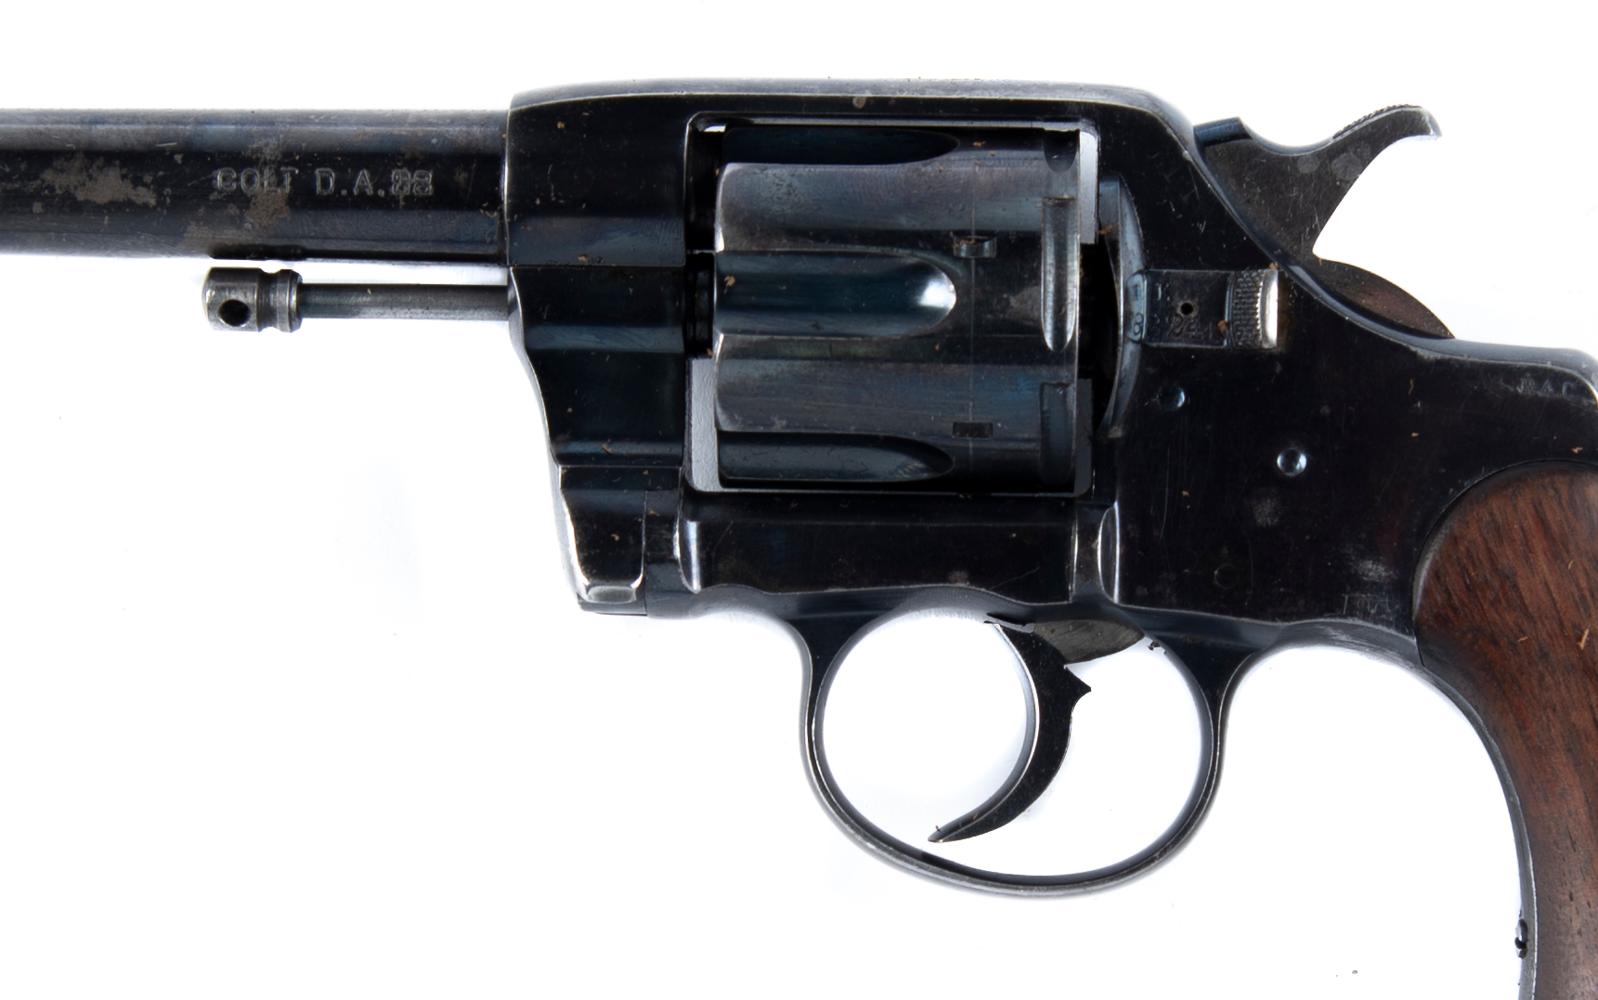 Colt Model 1901 .38 D.A. Army Revolver w/ Holster